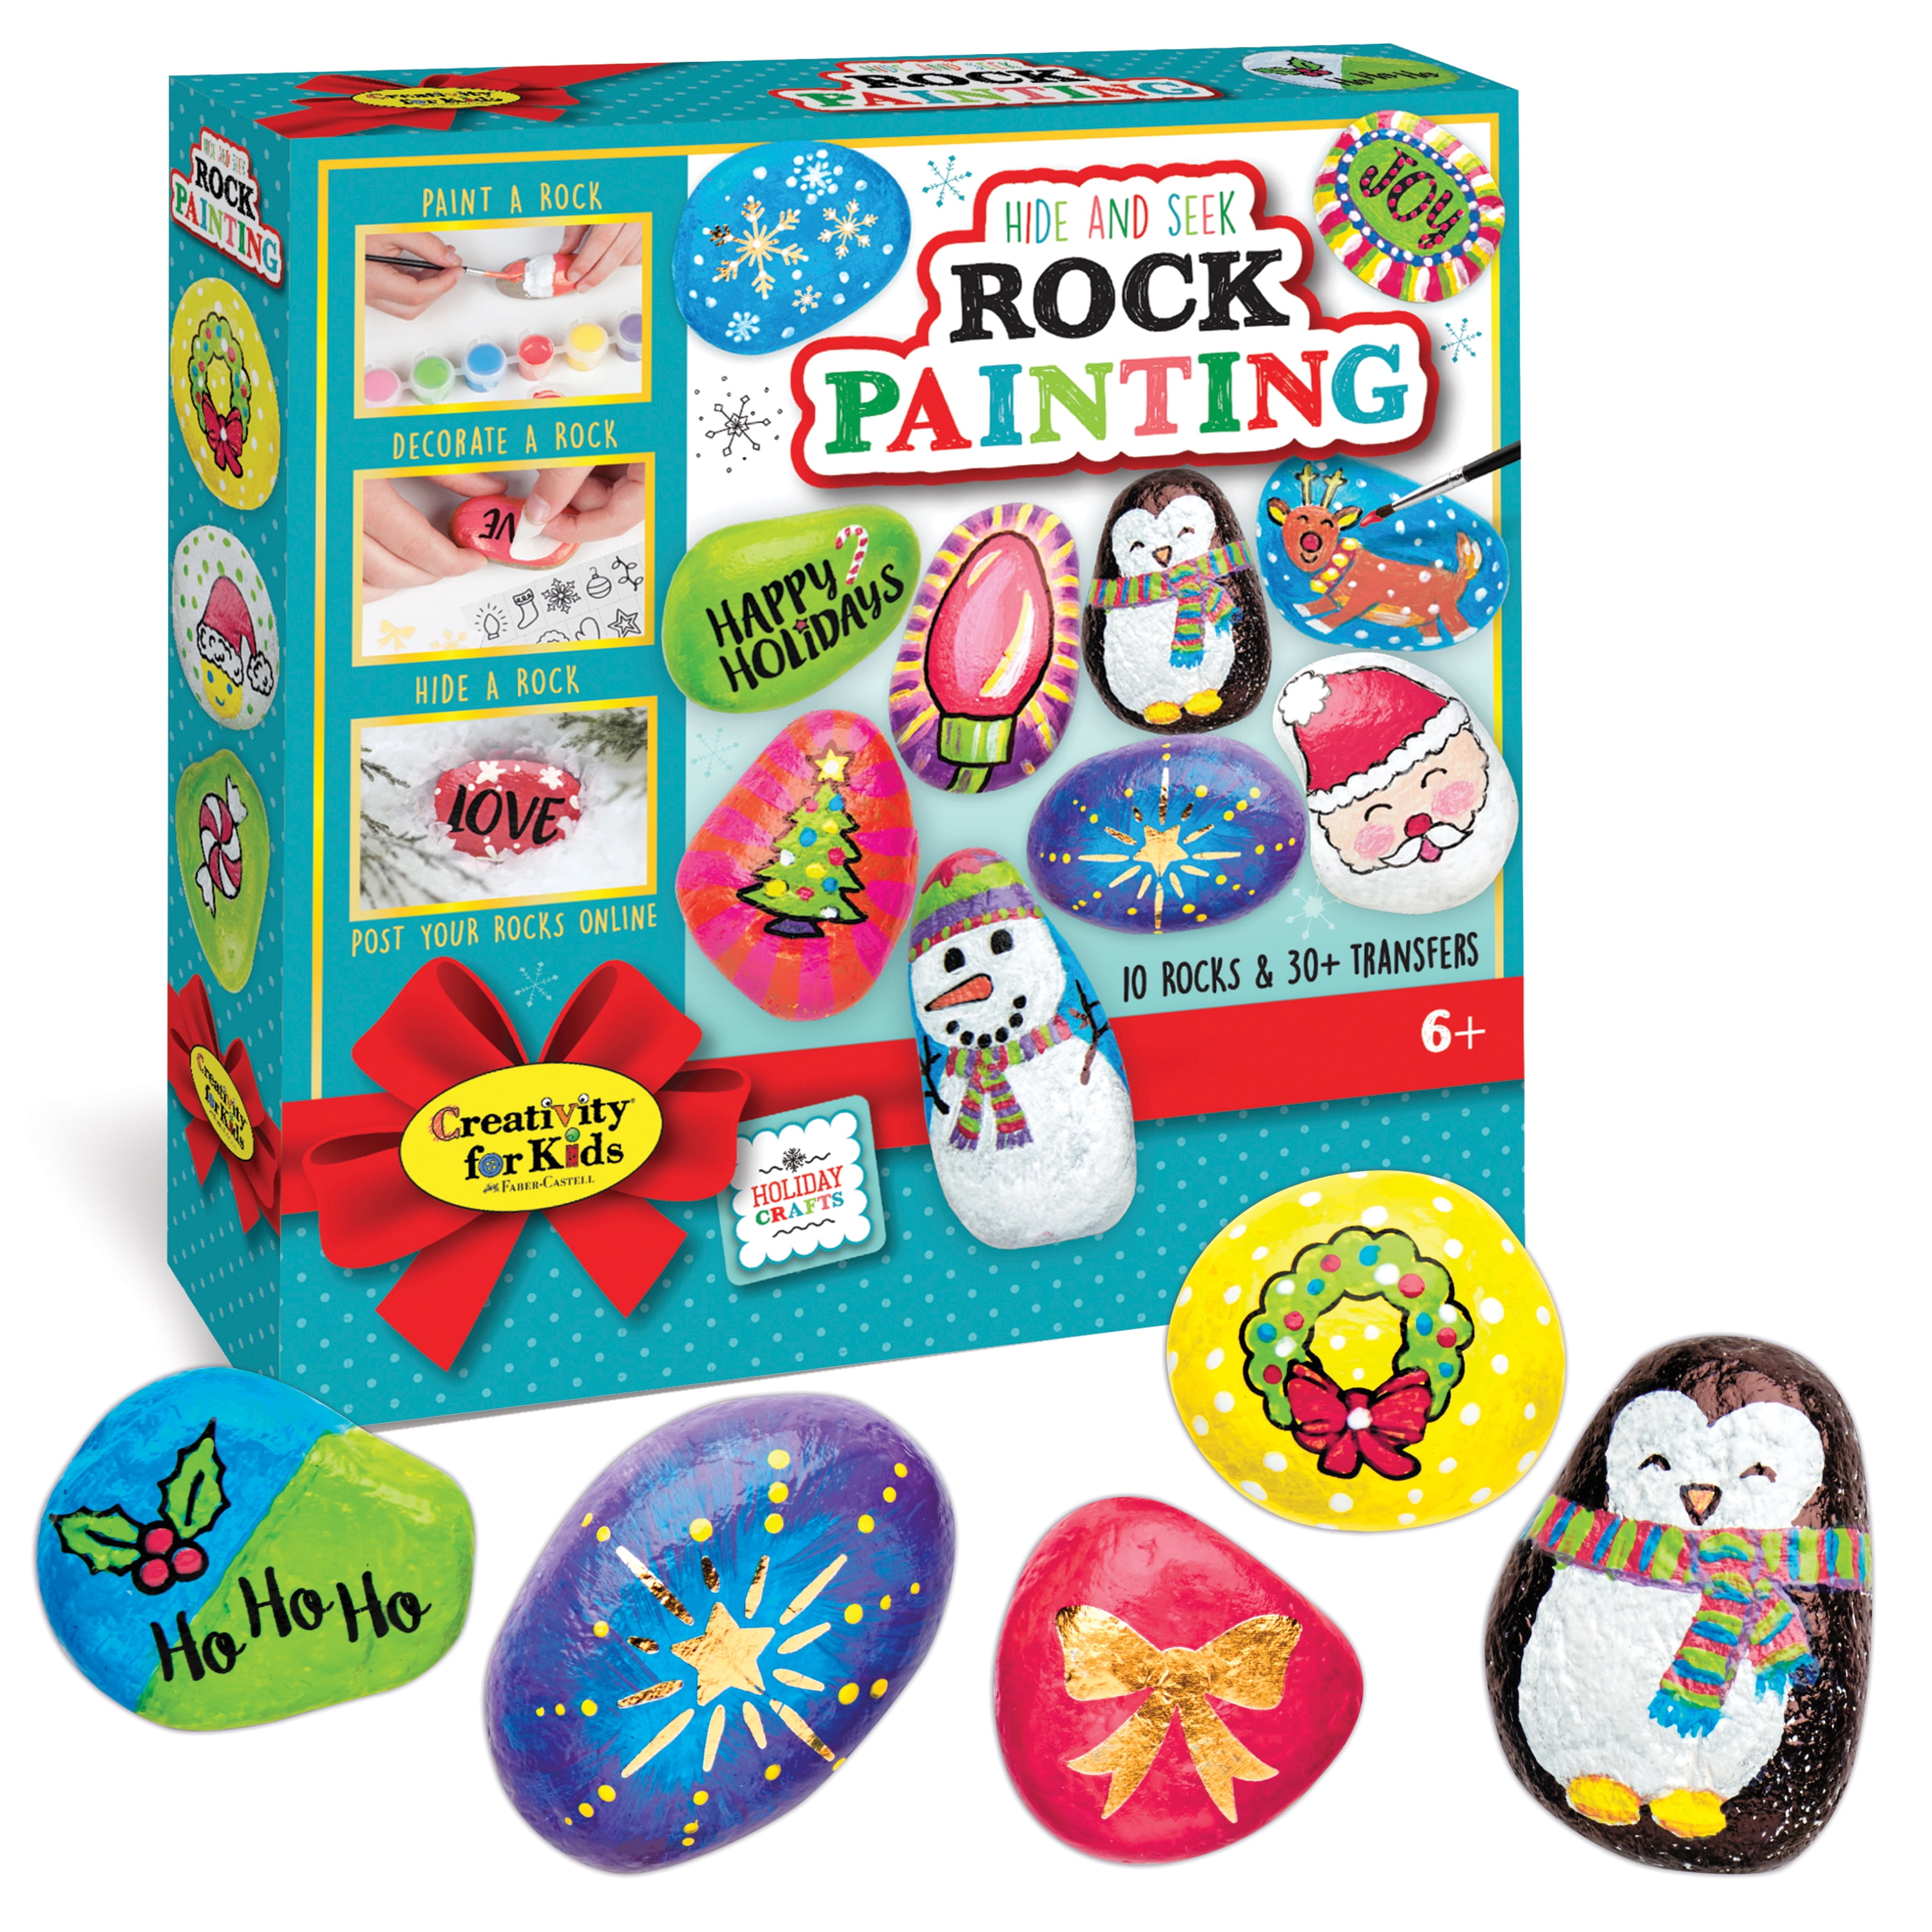 2020 Edition Neon Paint Your Own Rocks Mini Kit Rock Painting Children’s Craft 